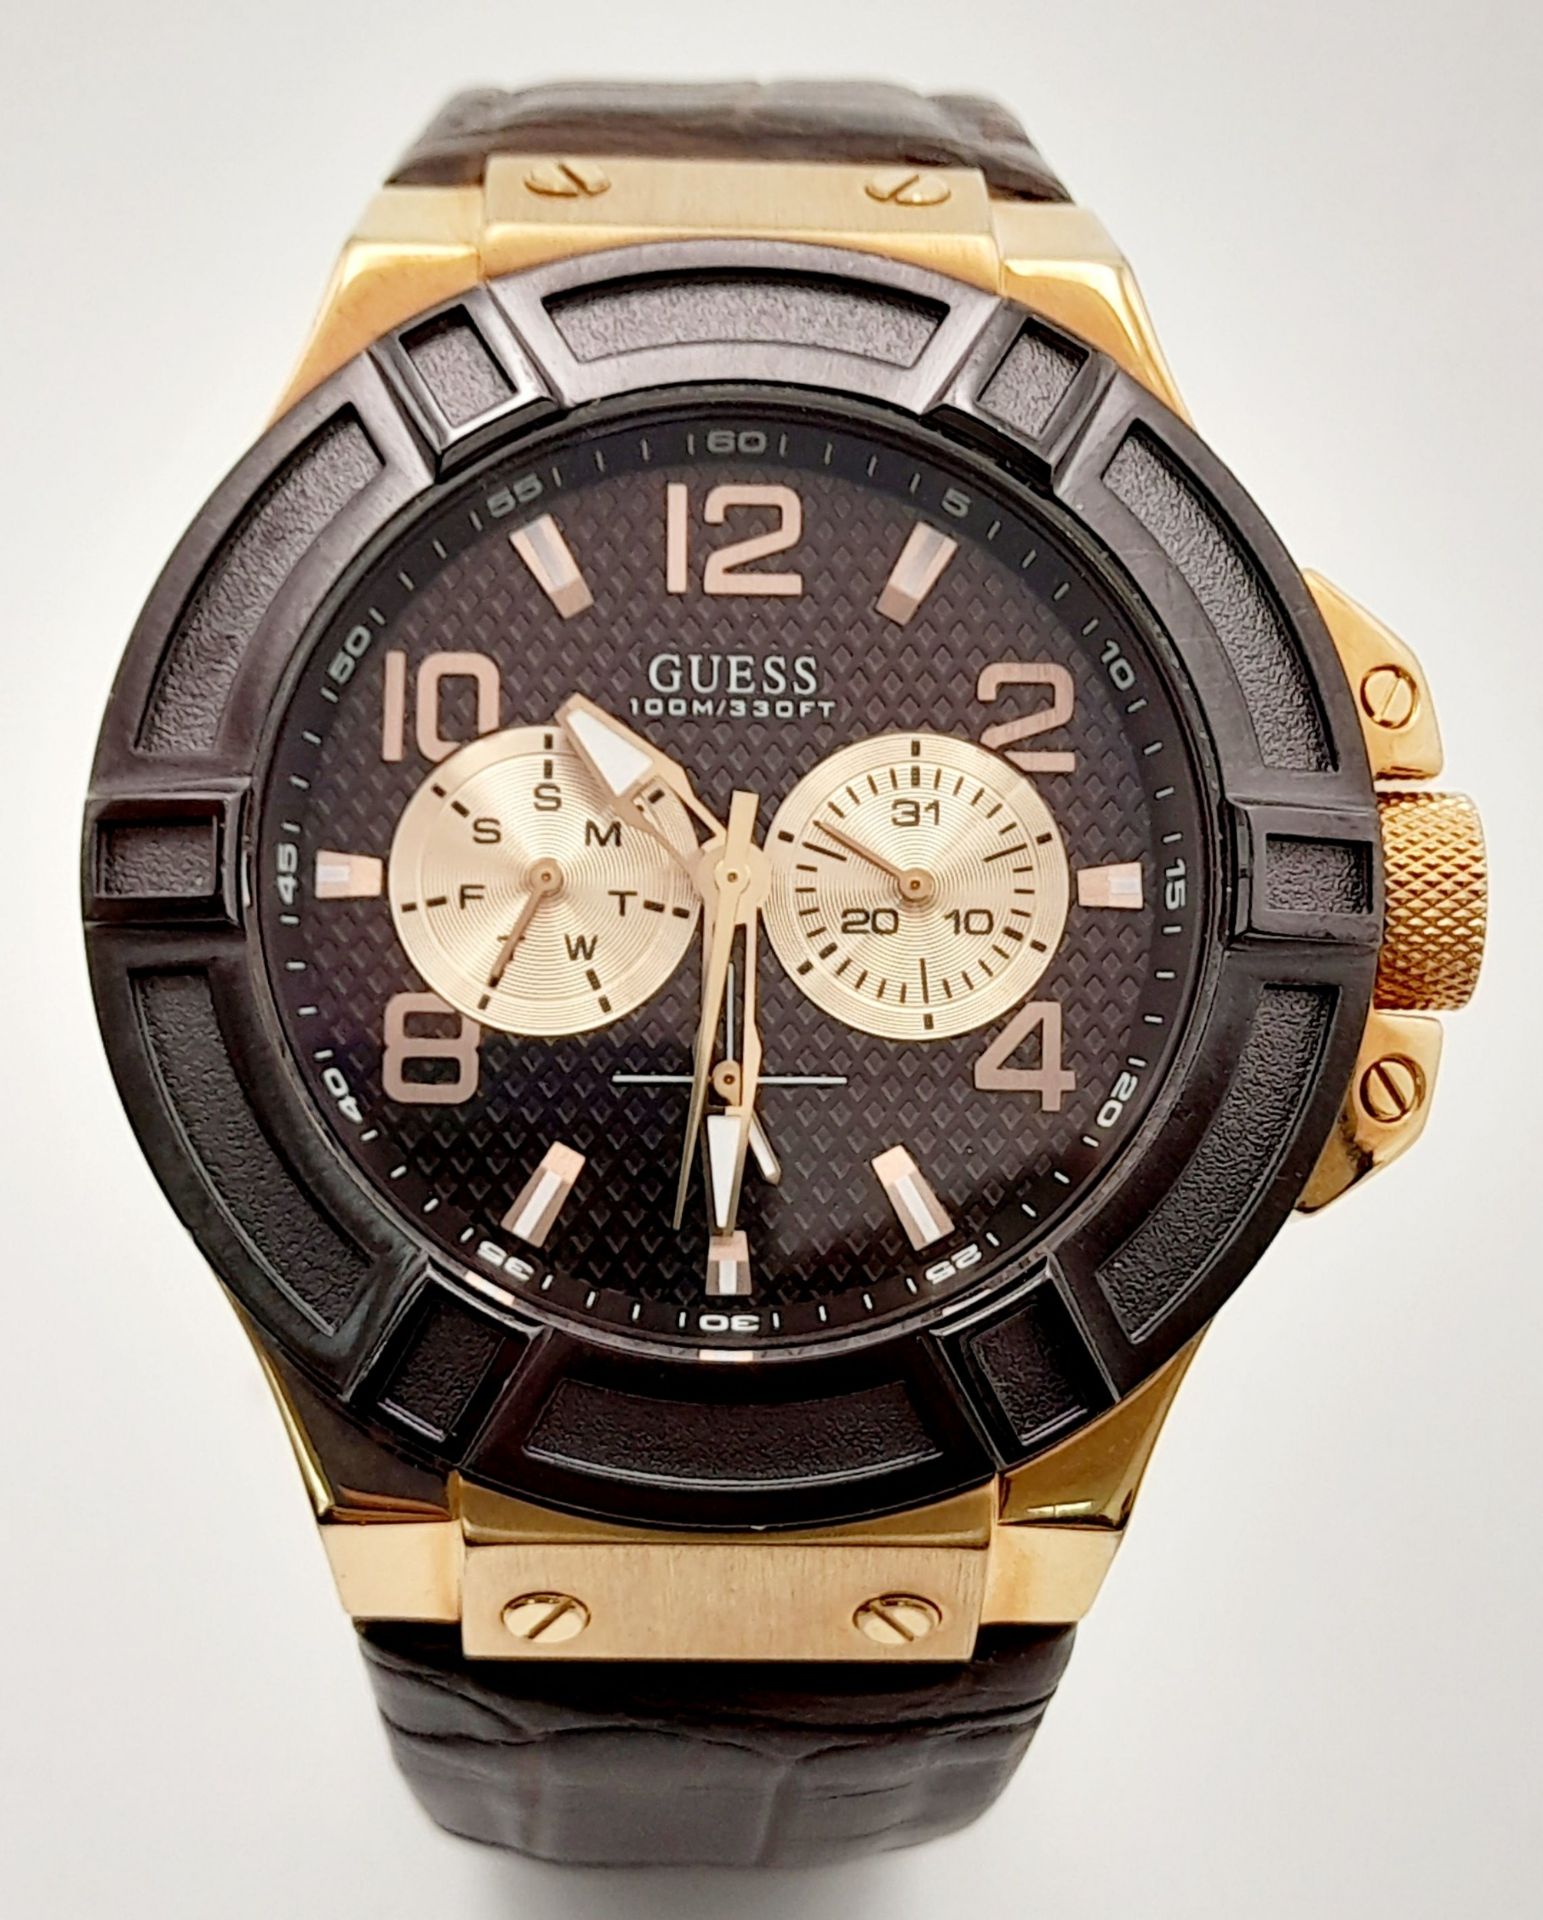 A Men’s Rose Gold-Toned Sports Fashion Watch by Guess (45mm Case). Full Working Order. - Image 5 of 6